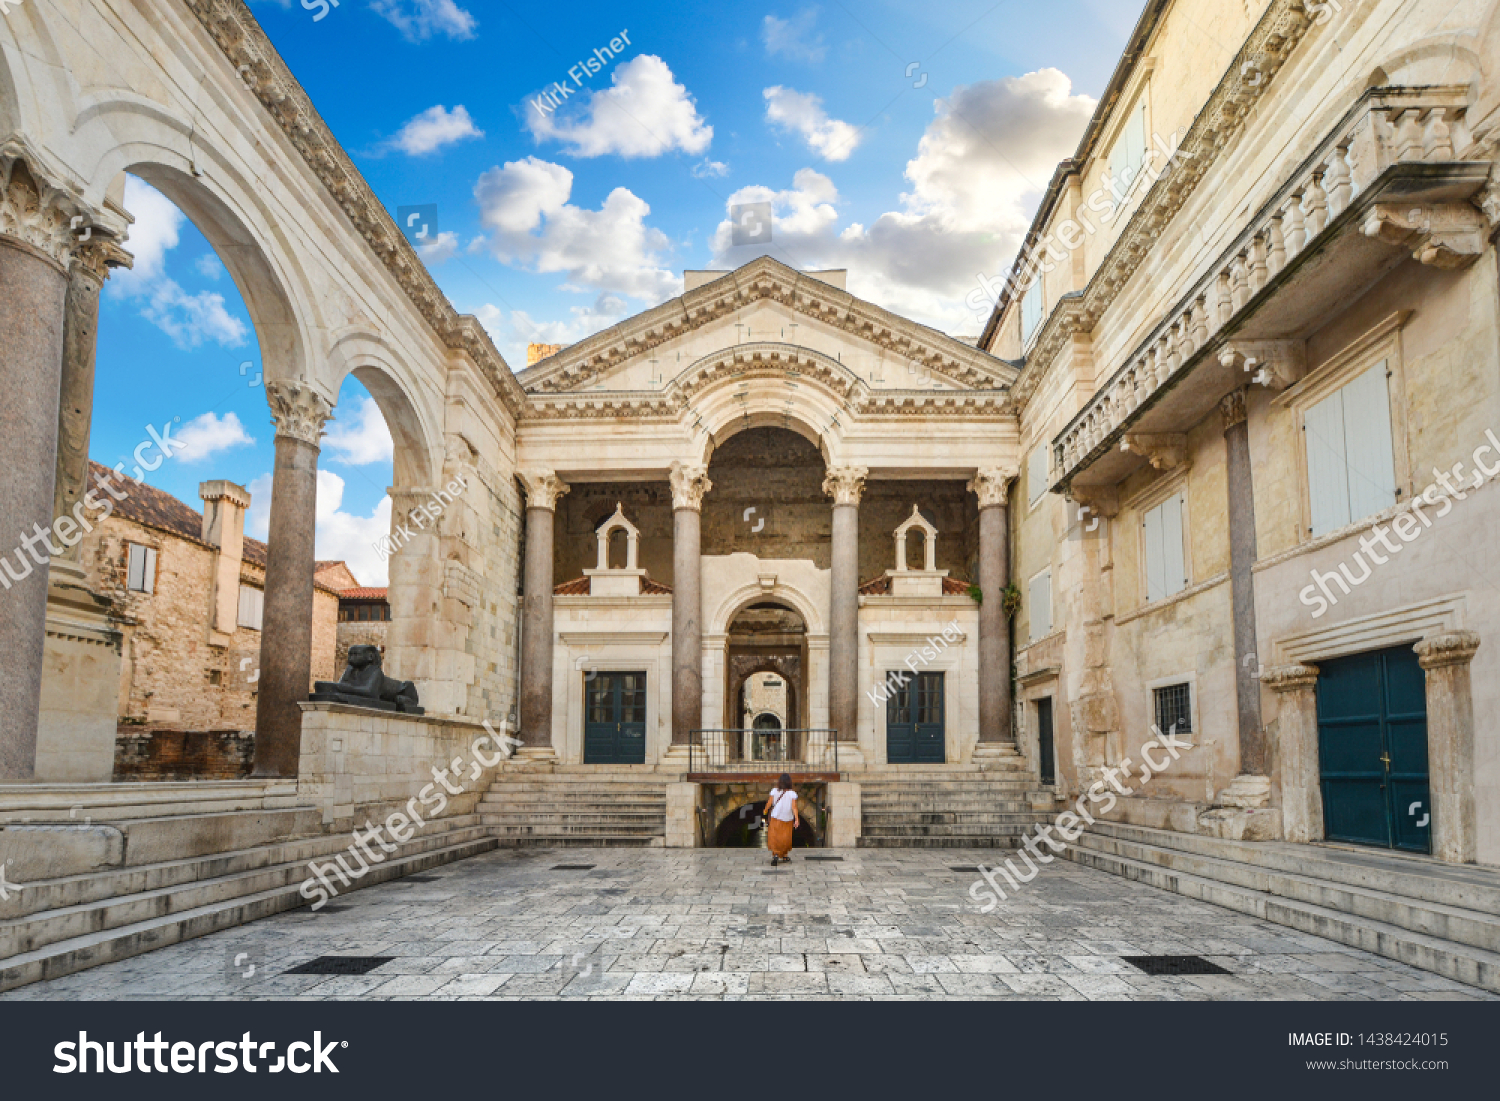 A woman walks through the Peristil or Peristyle Square of the ancient Diocletian's Palace in the old town area of Split, Croatia early in the morning. #1438424015